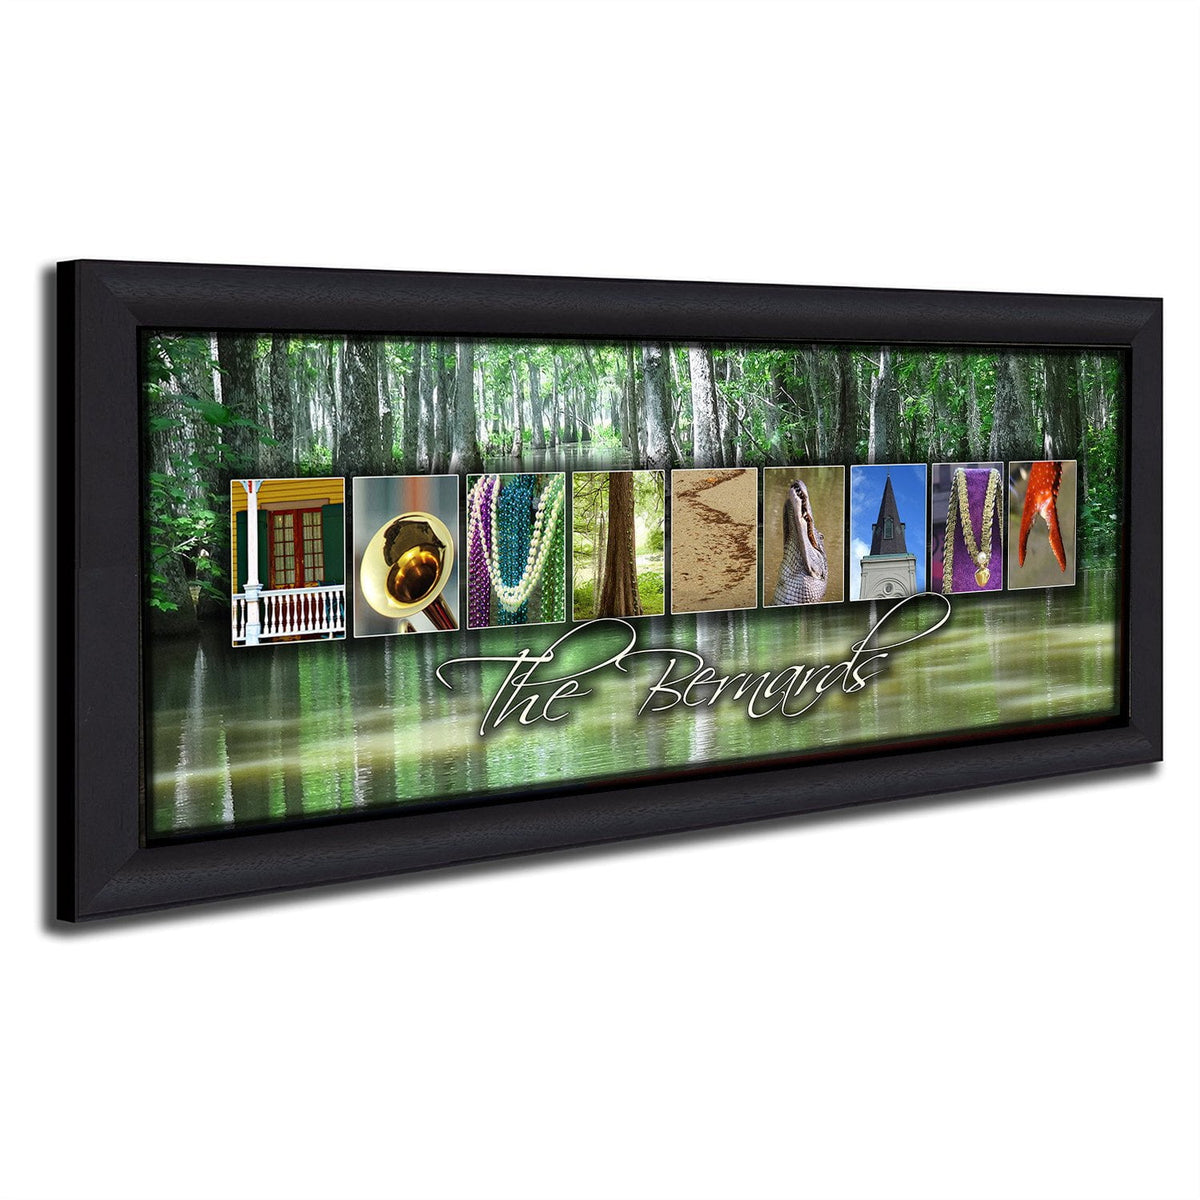 Louisiana photography on Canvas Art from Personal-Prints